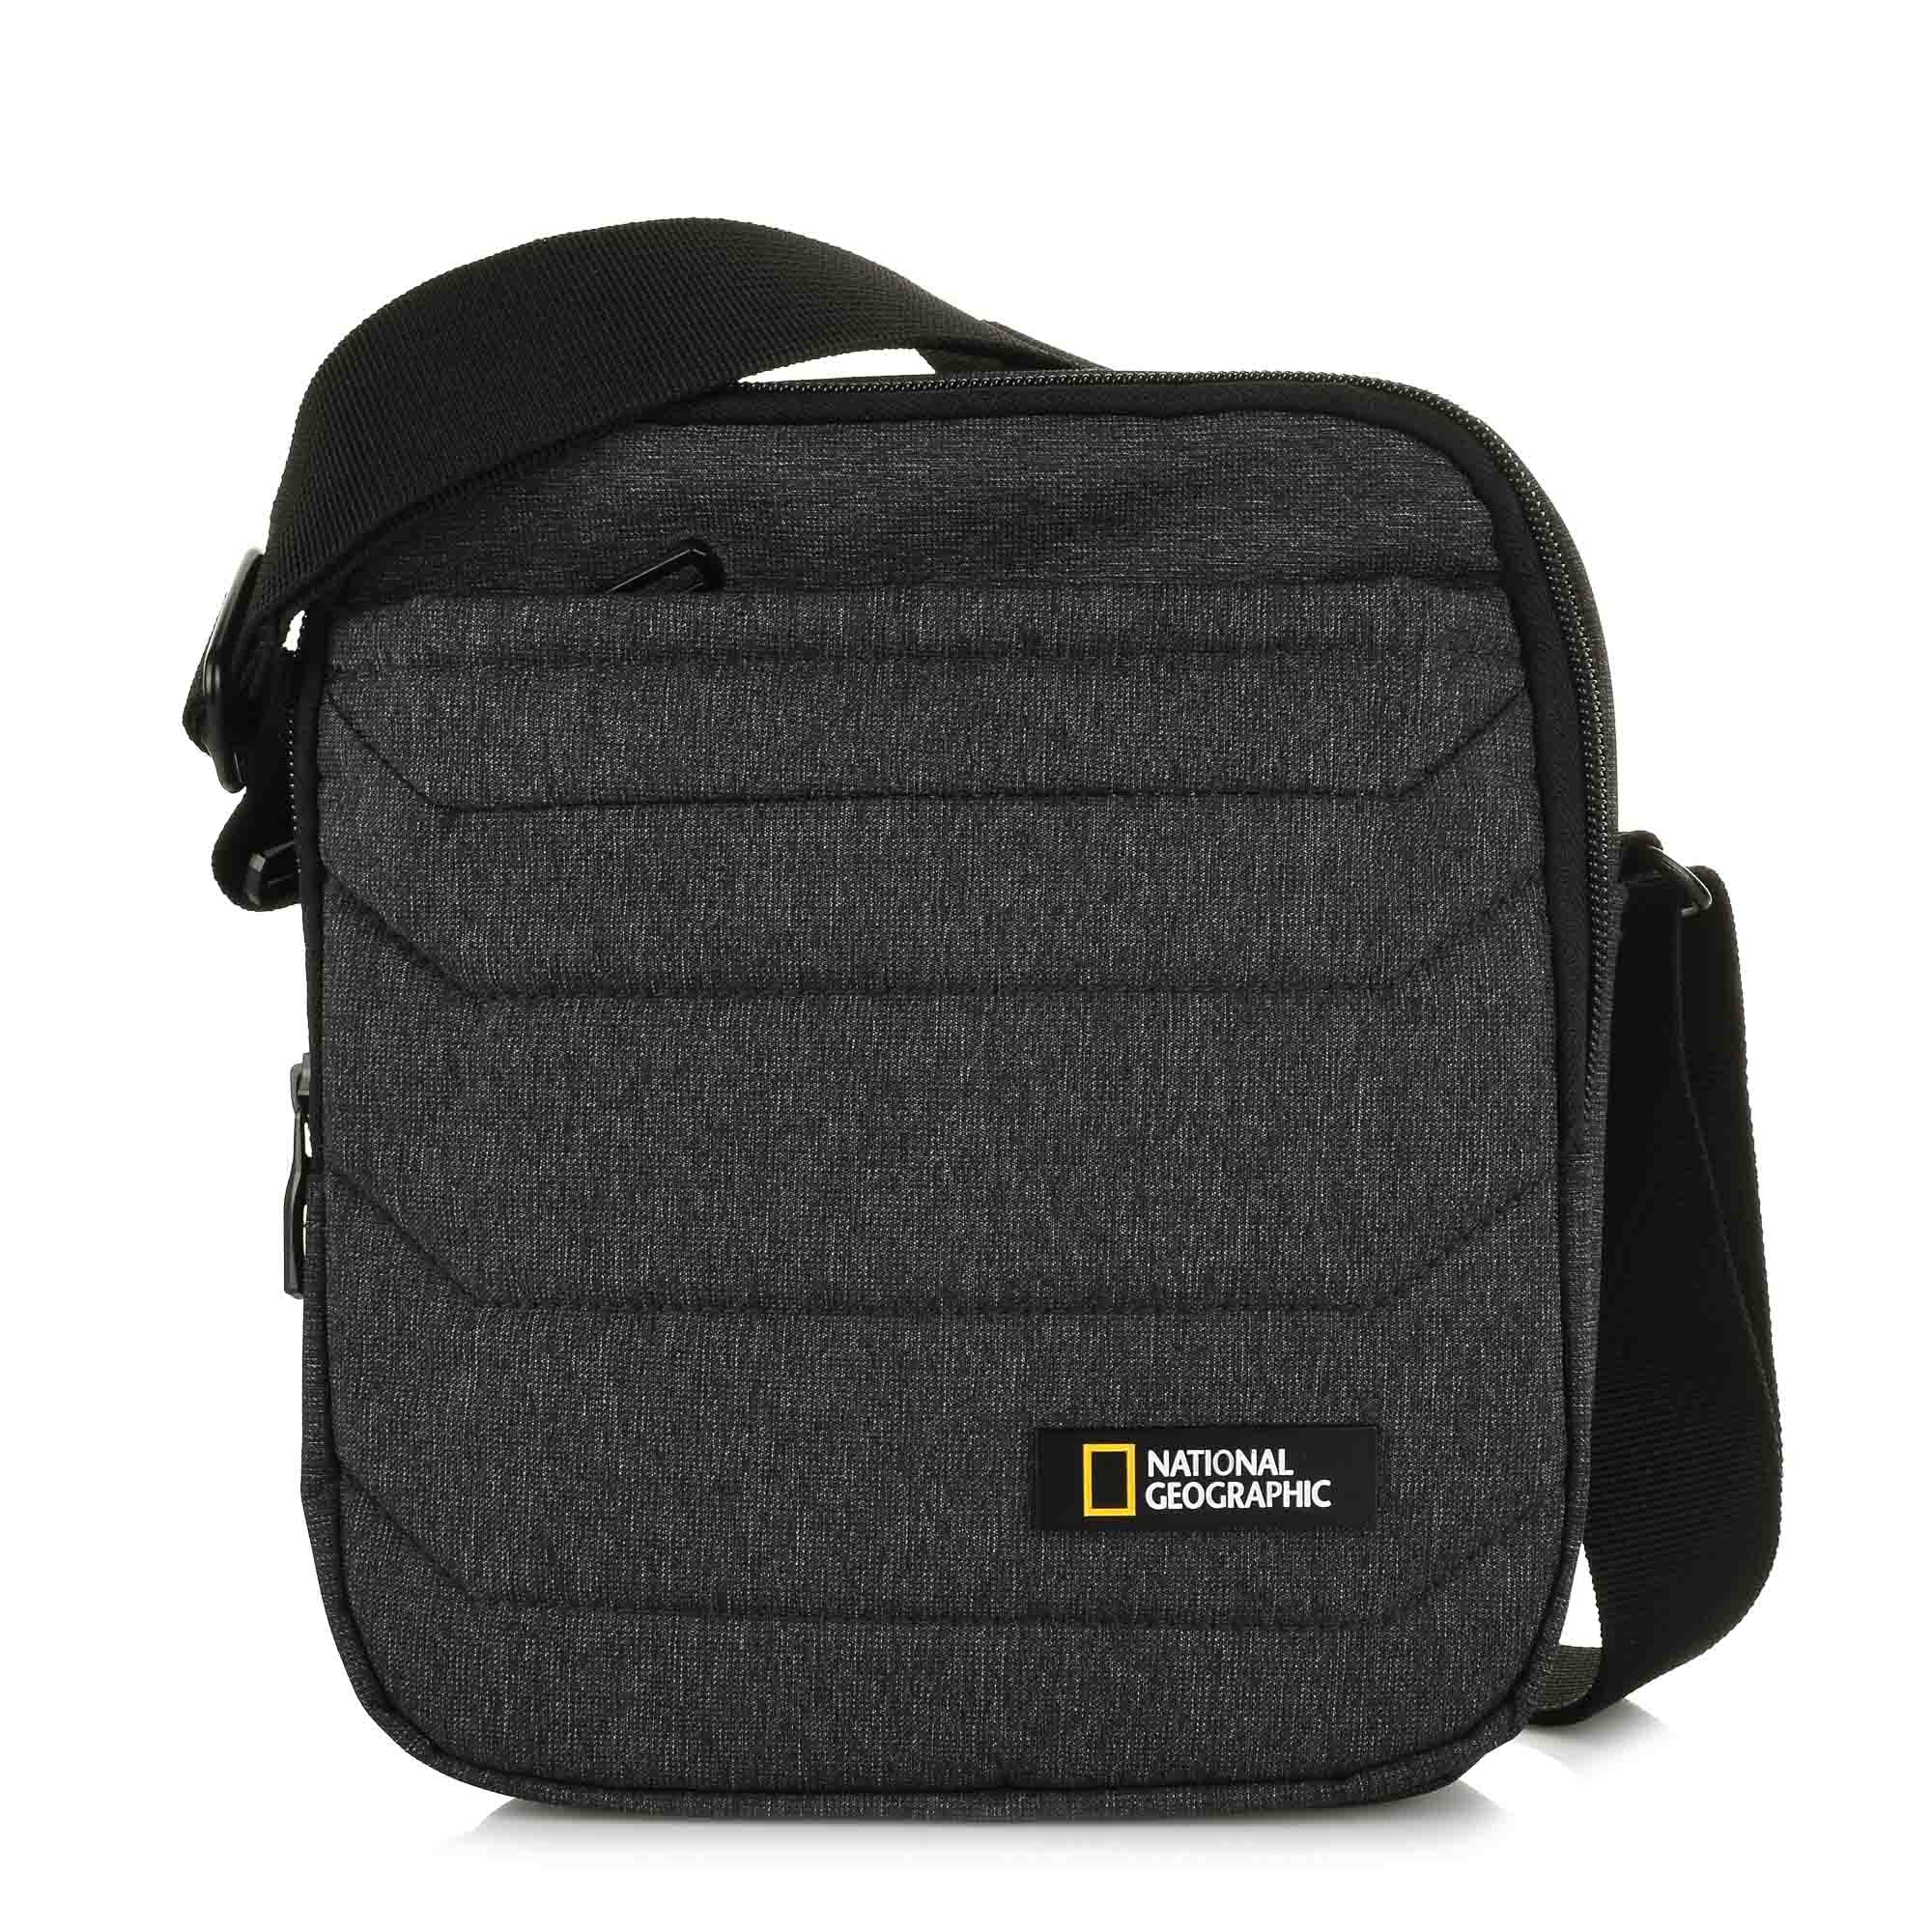 National Geographic Τσαντάκι Χιαστί National Geographic Pro Range Utility Bag N00702.125 Two tones grey